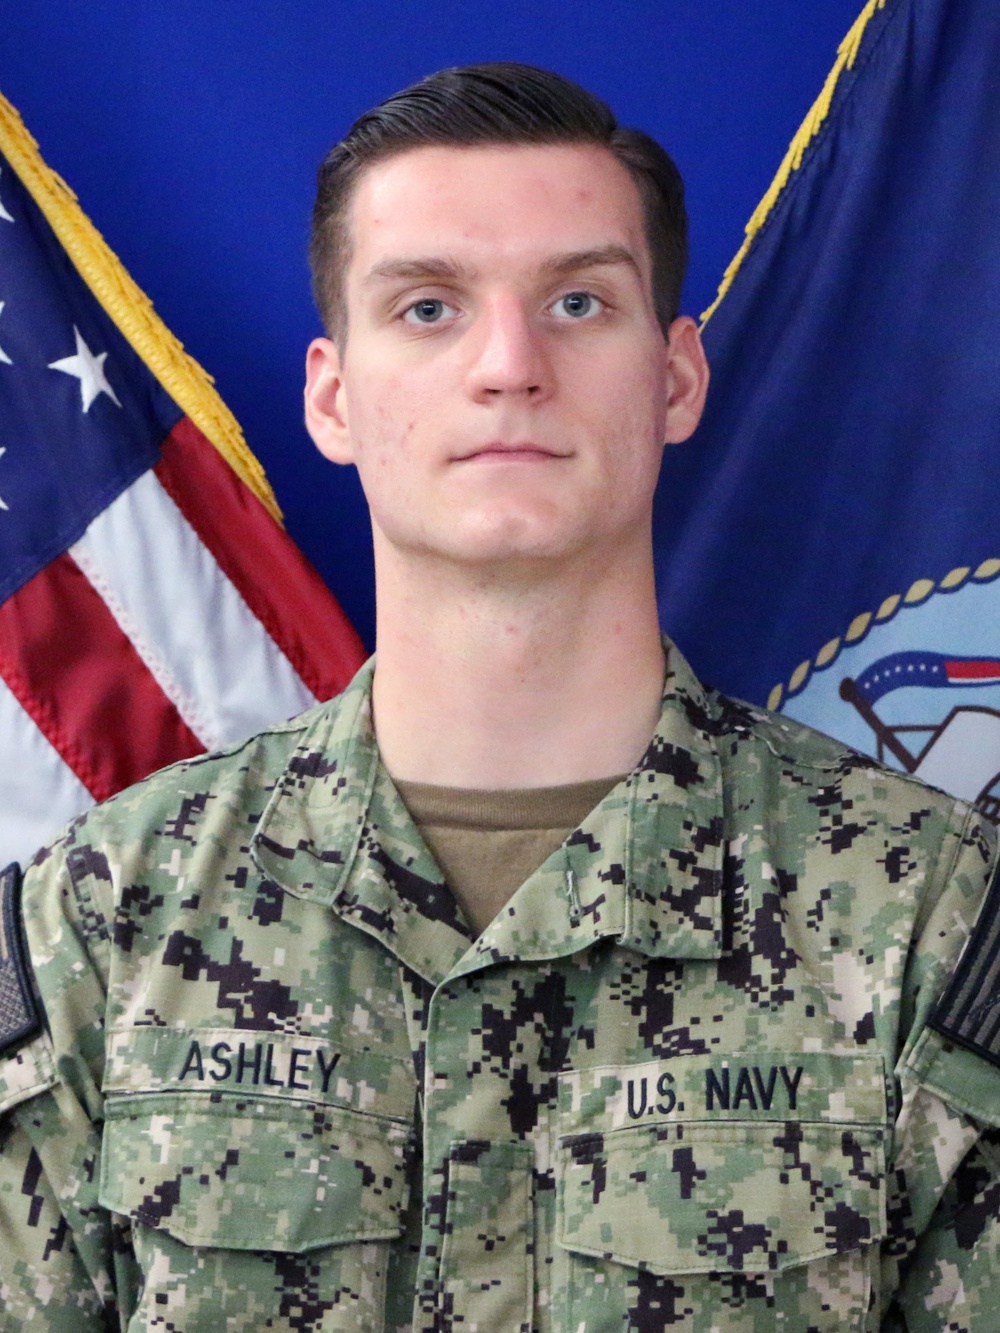 IWTC Virginia Beach Sailor Supports Training Mission, Enables Navy Readiness